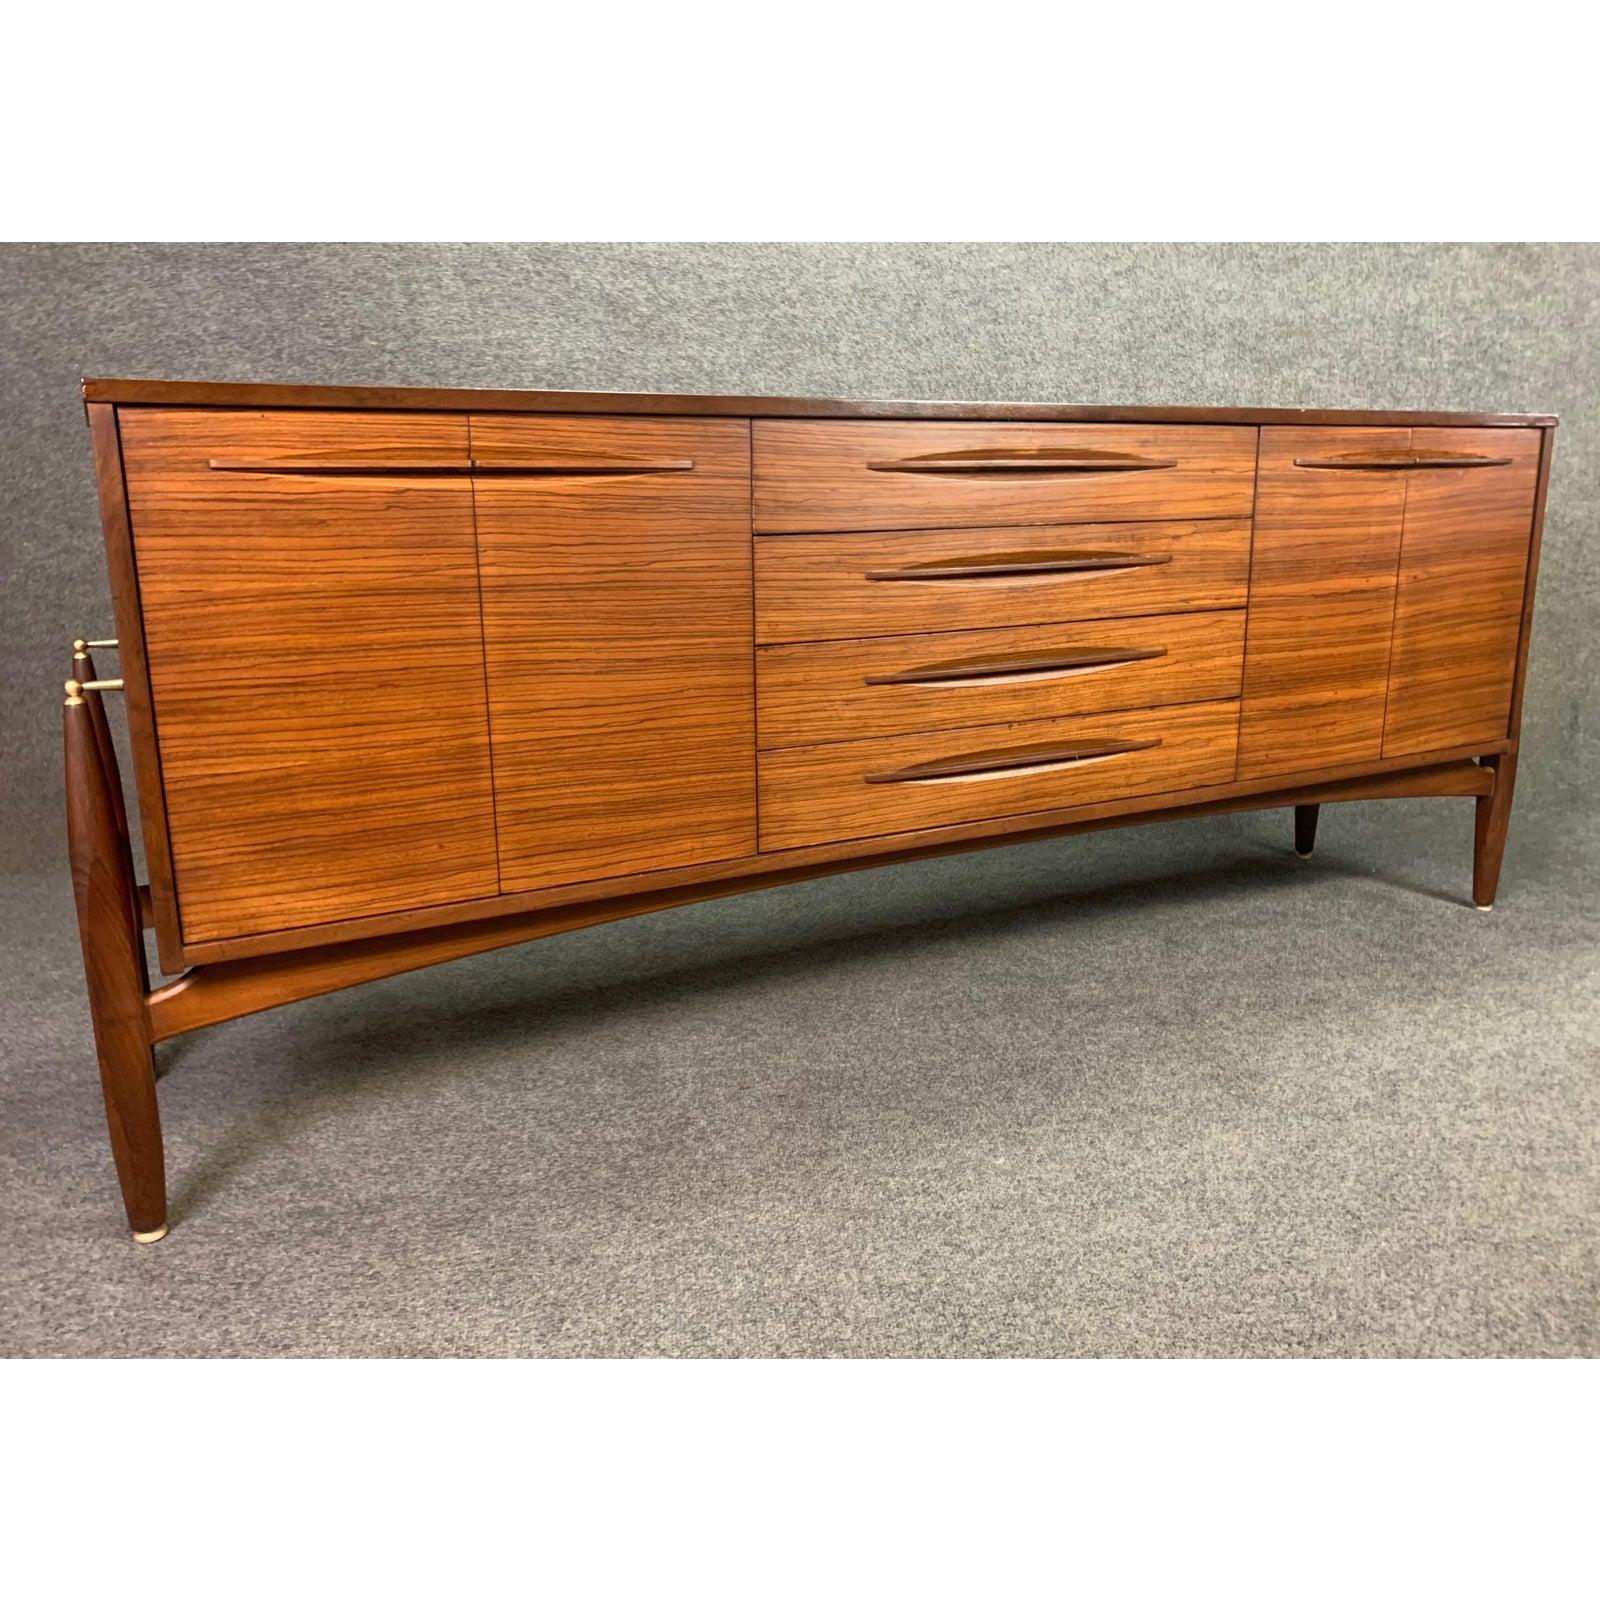 Here is a beautiful MCM sideboard in zebra wood manufactured by Elliotts of Newbury in England in the 1960s.
This lovely credenza was recently imported from UK to California, has been cleaned up, oiled and is in its original condition.
It features